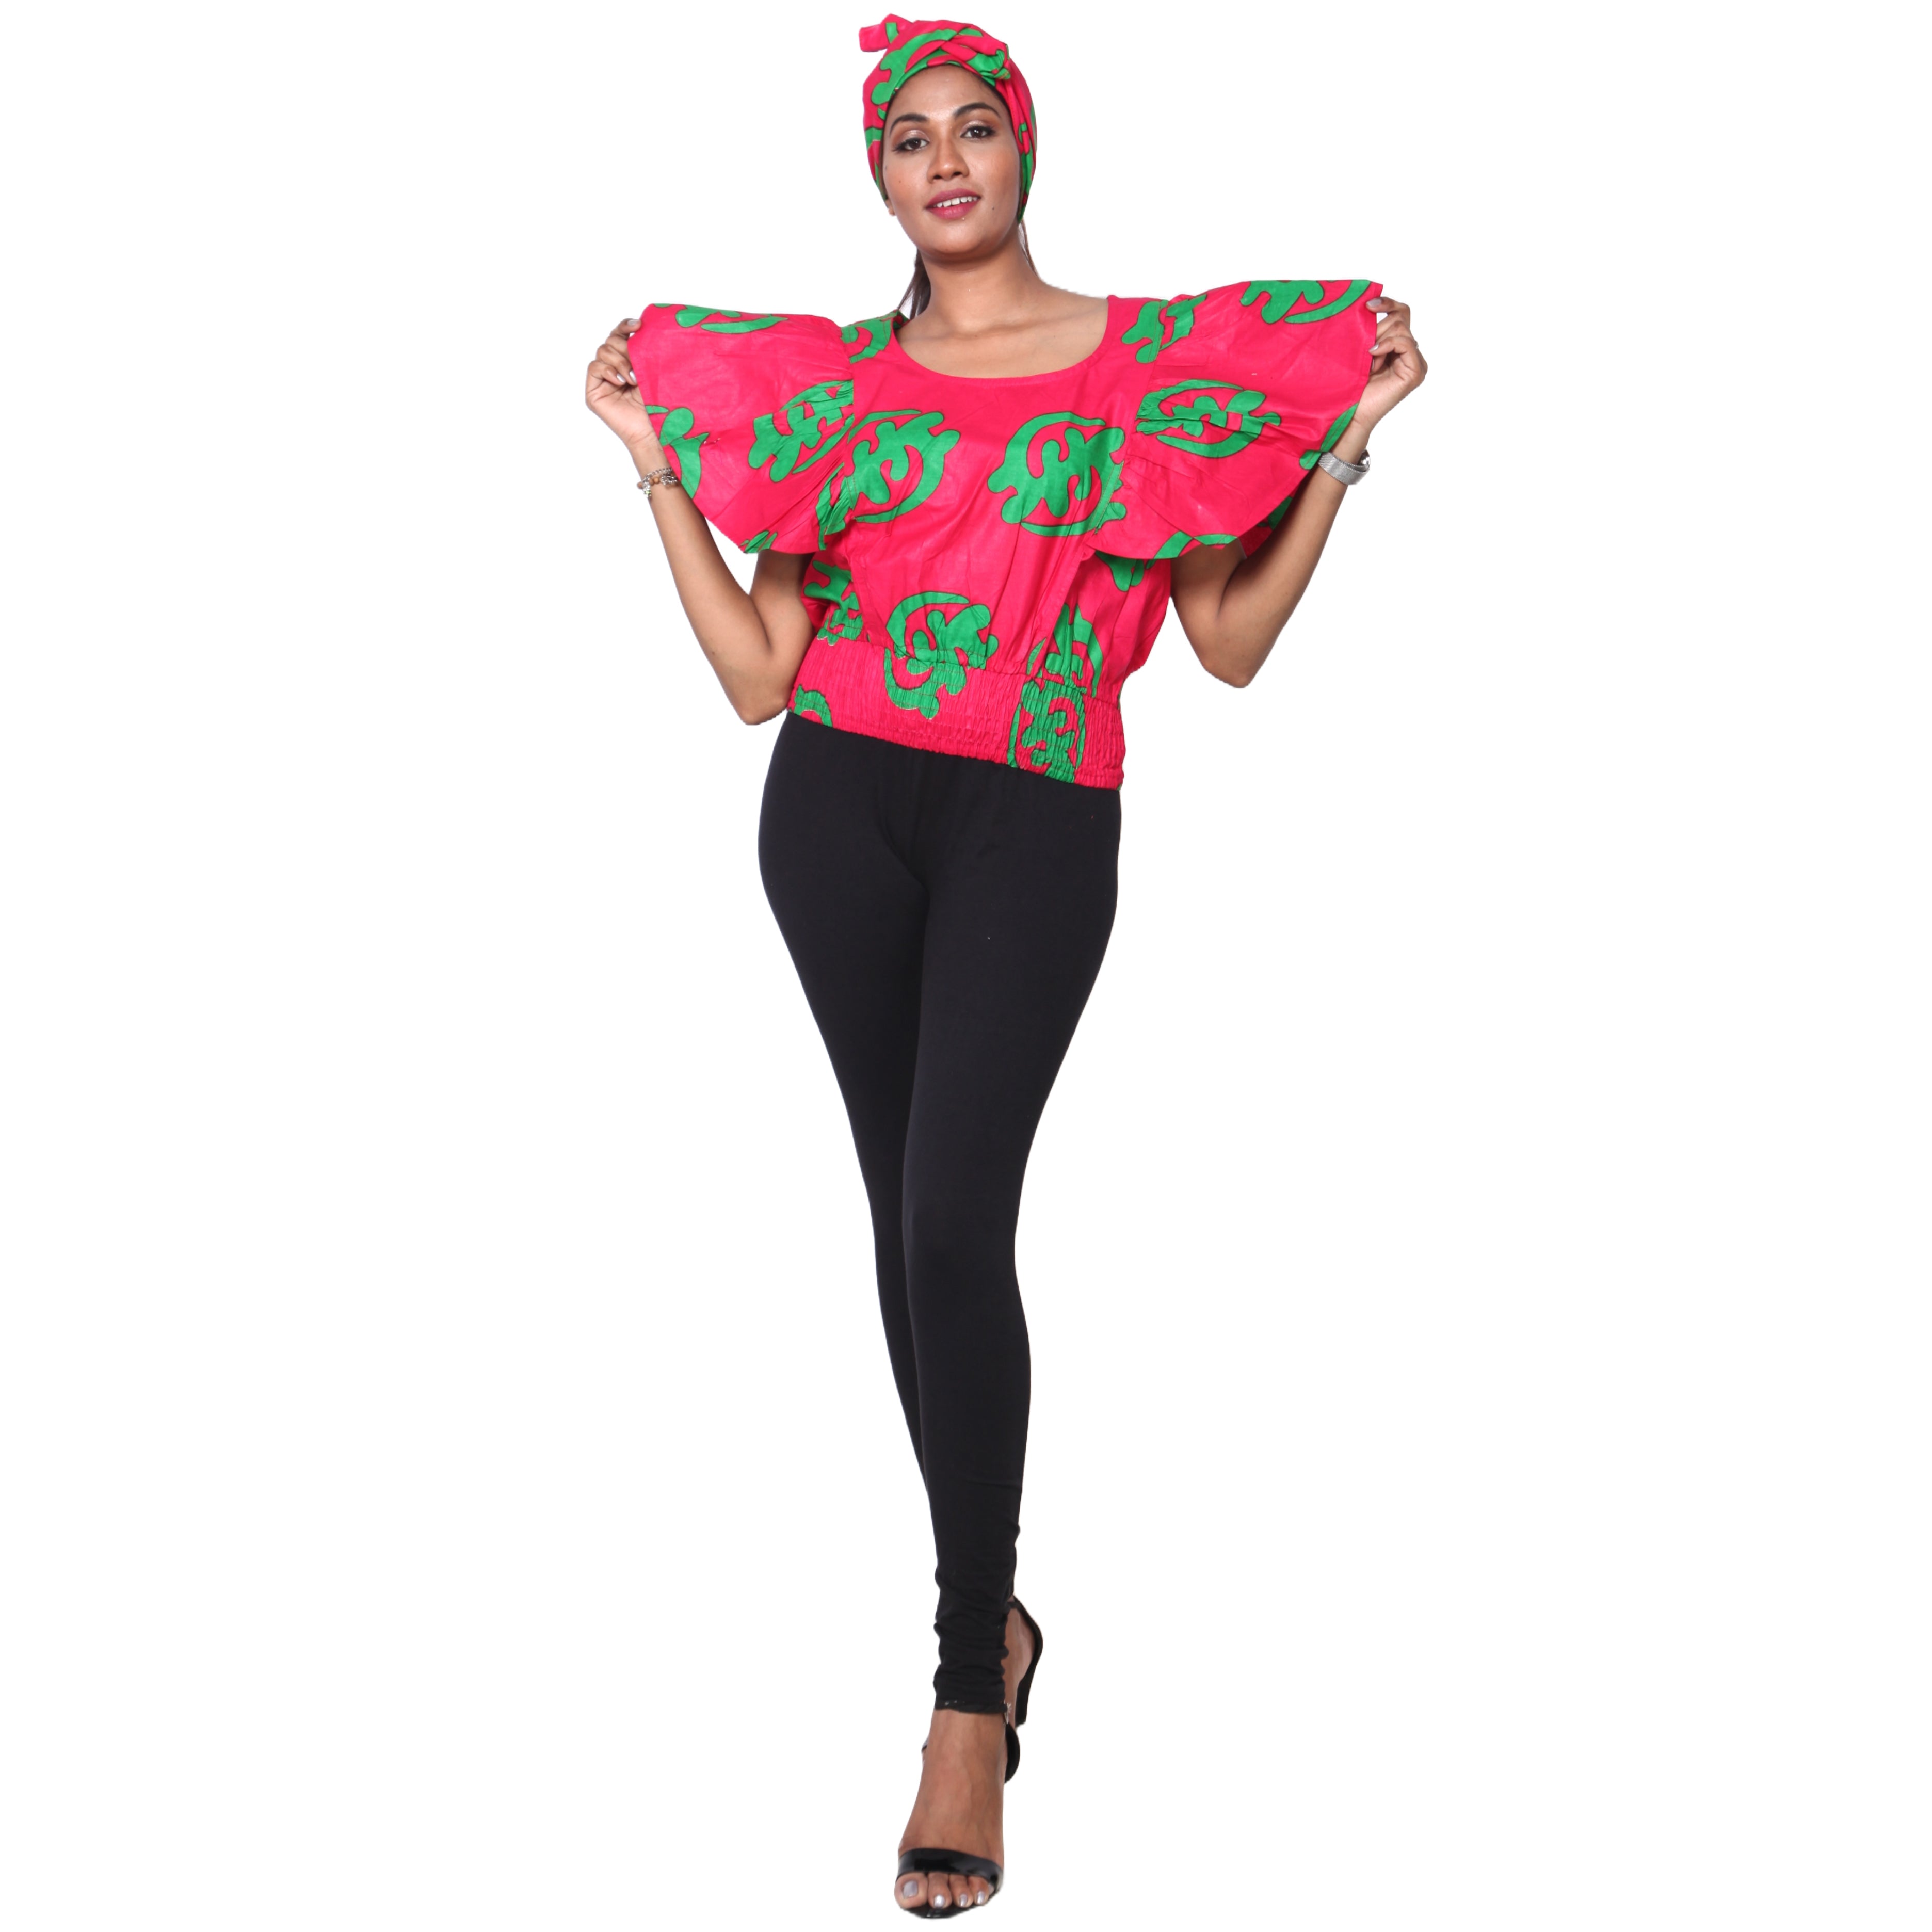 Women's African Print Short Sleeve Top red and green